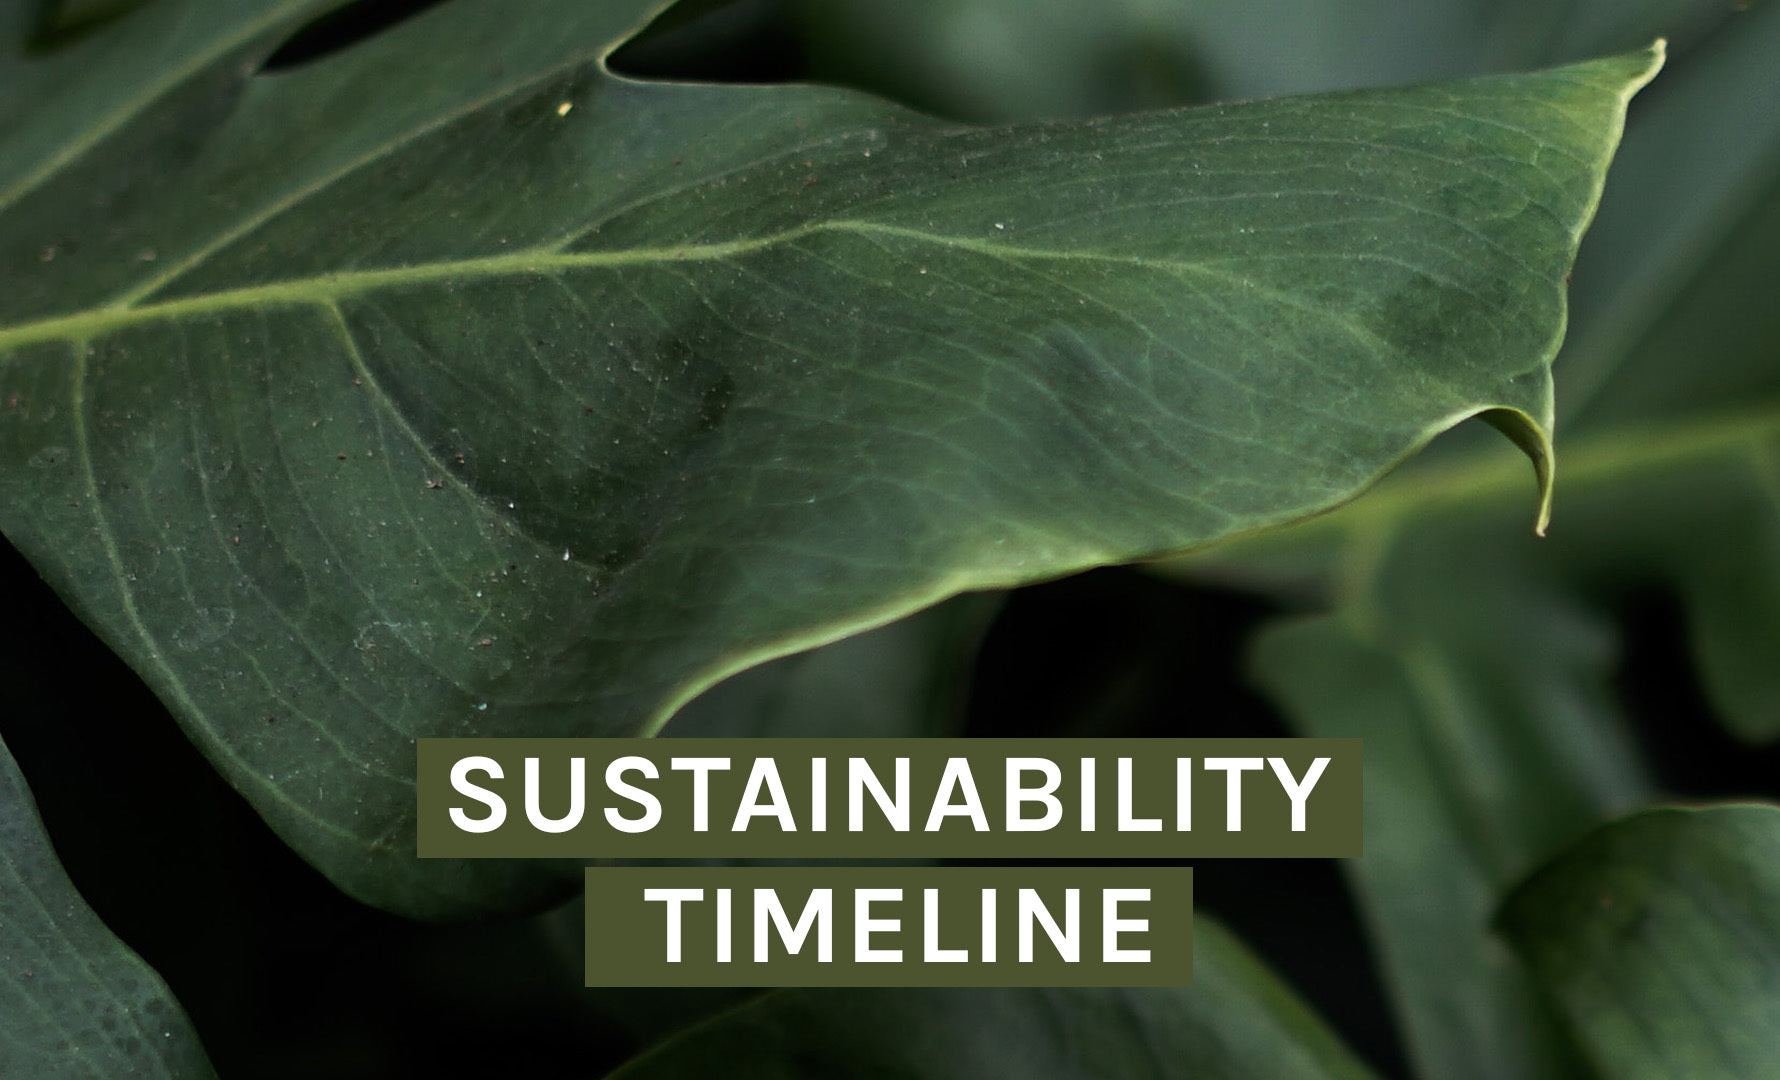 Our Sustainability Timeline